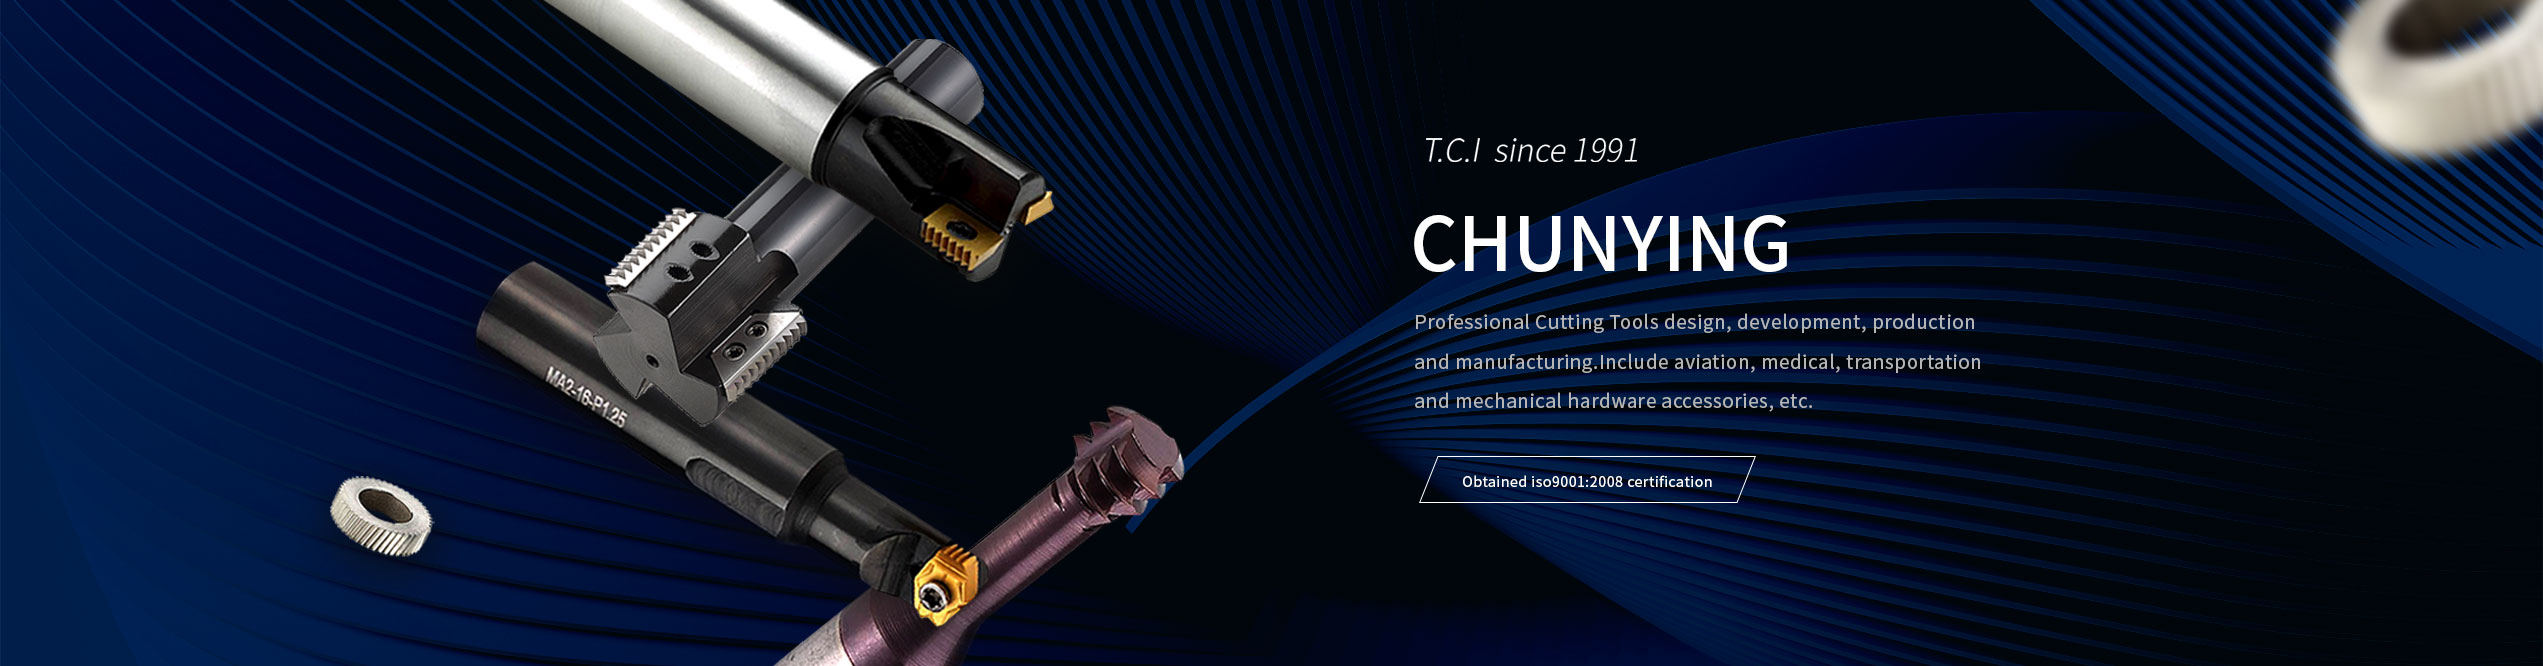 CHUNYING Professional Cutting Tools design, development, production and manufacturing. Include aviation, medical, transportation and mechanical hardware accessories, etc.